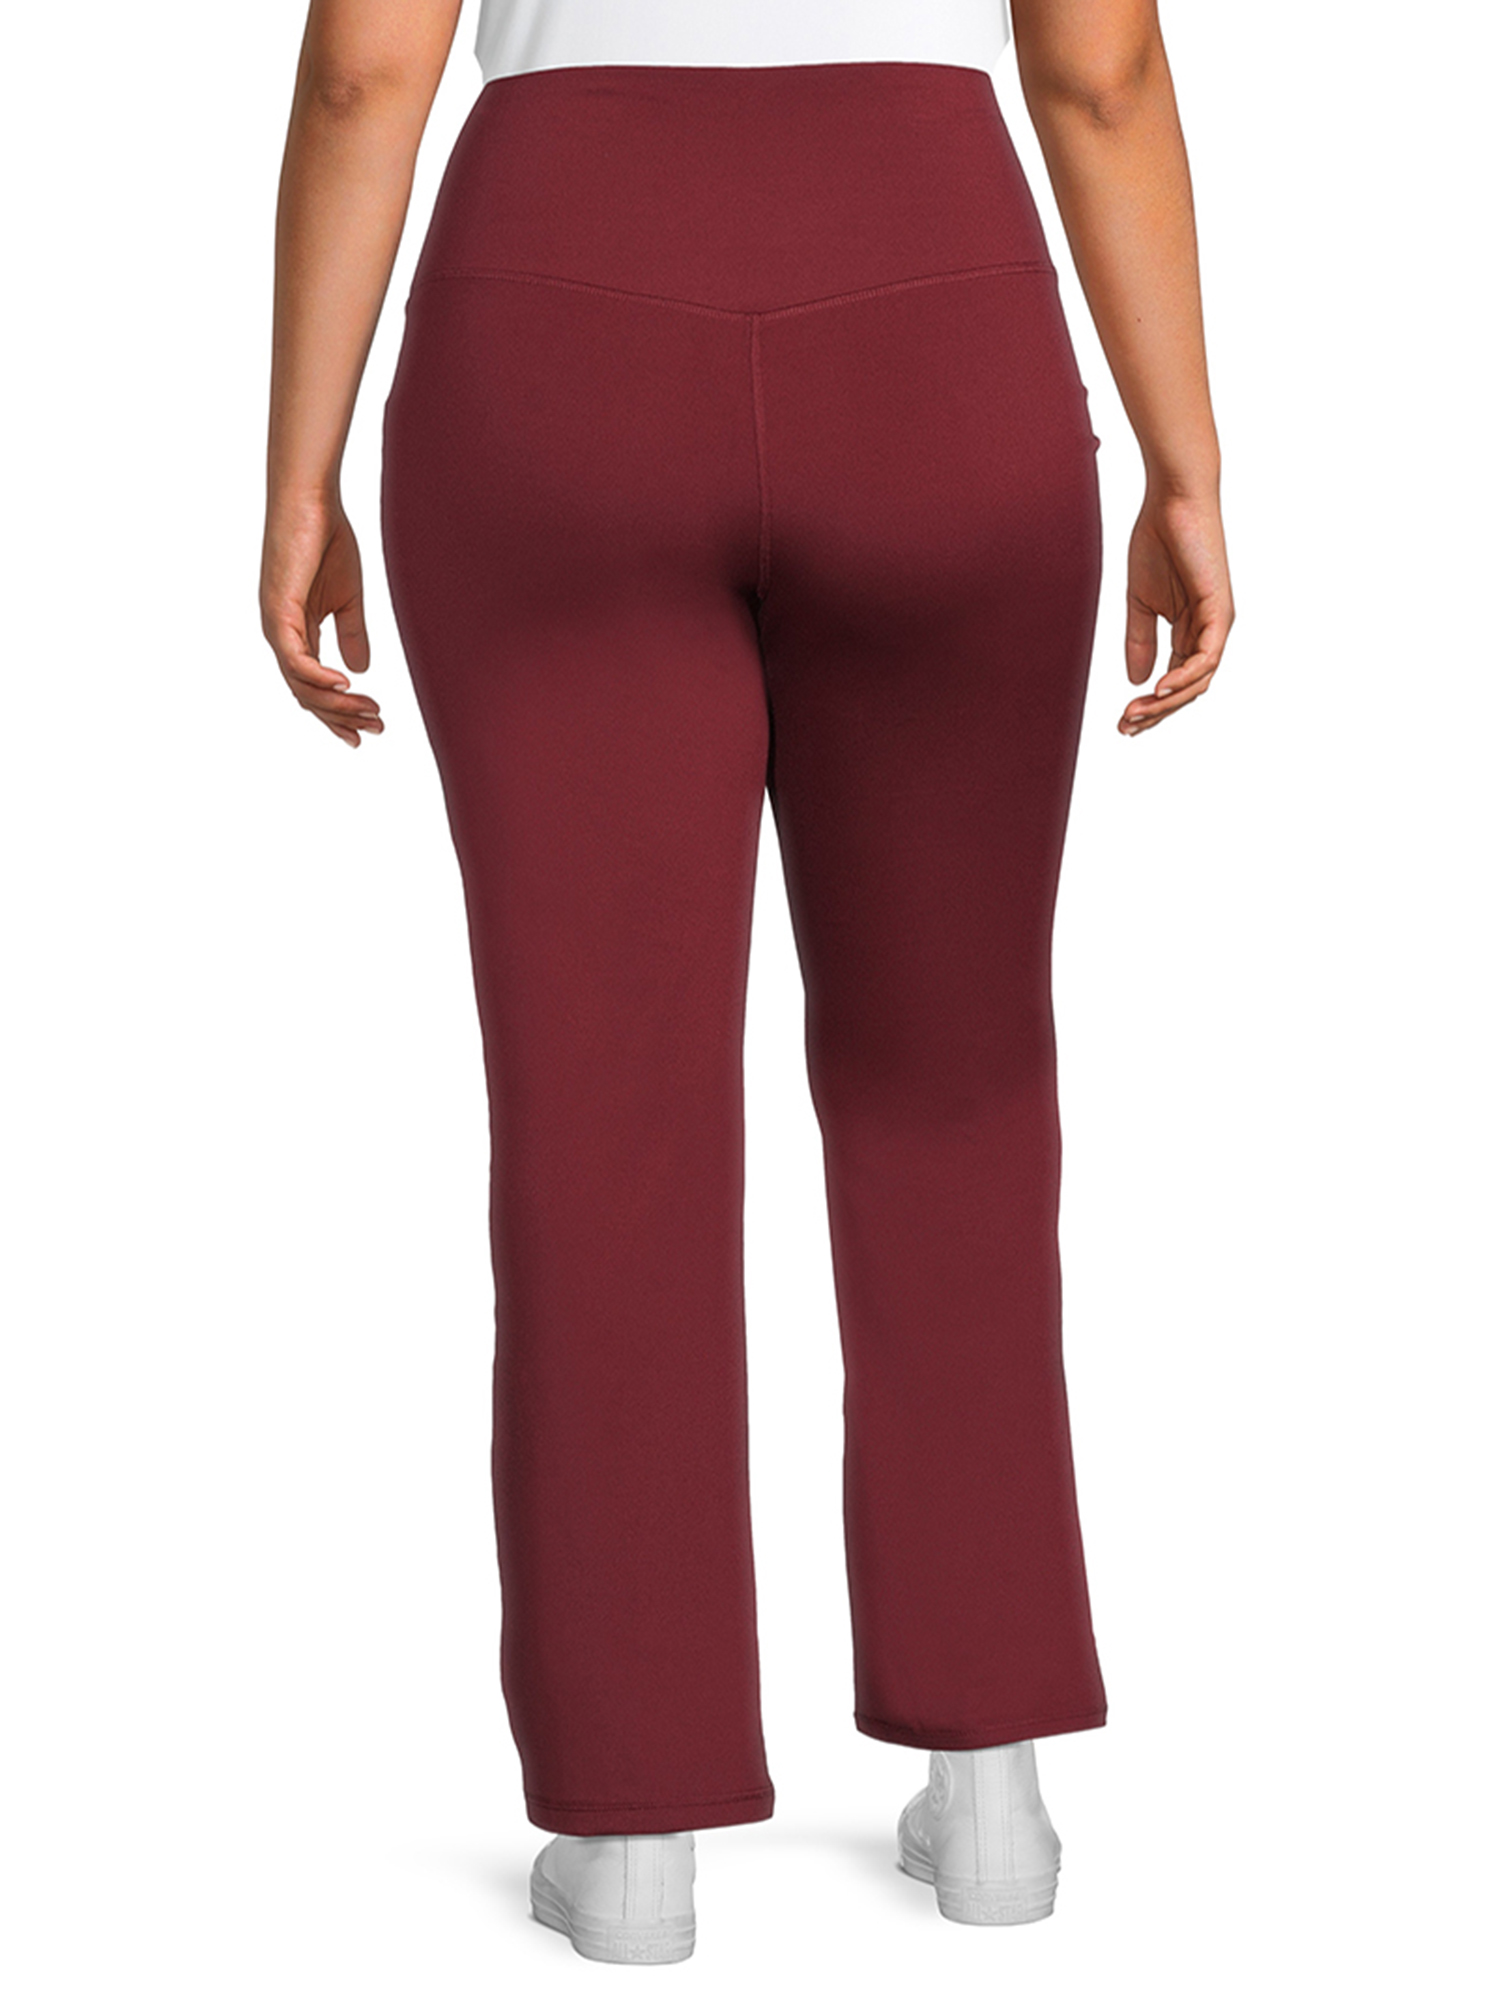 IUGA Regular Fit Women Multicolor Trousers - Buy IUGA Regular Fit Women  Multicolor Trousers Online at Best Prices in India